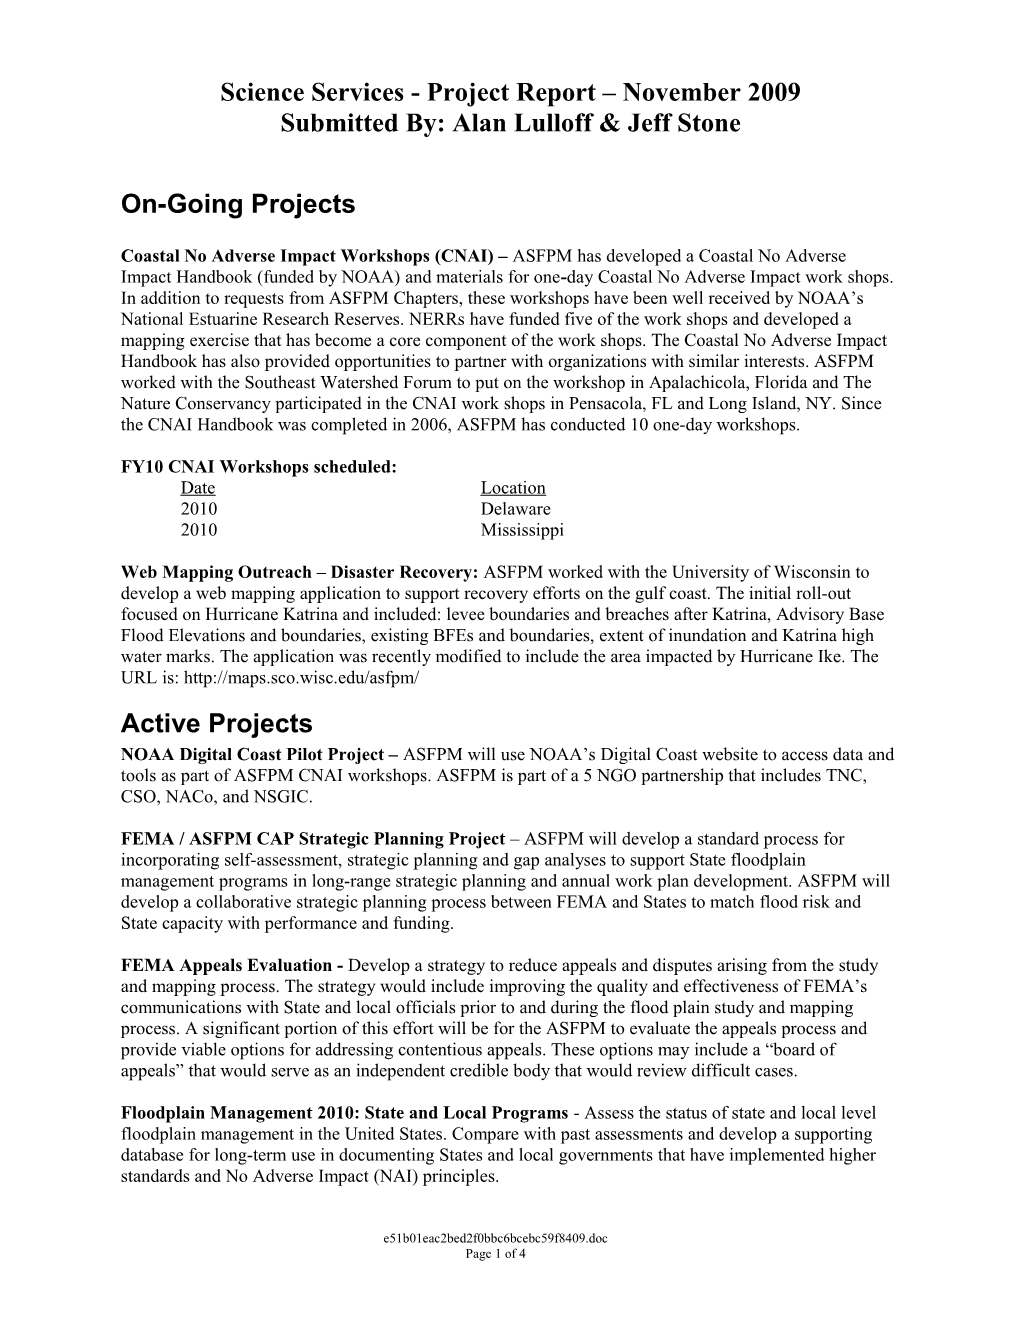 Project Manager's Report January 2008